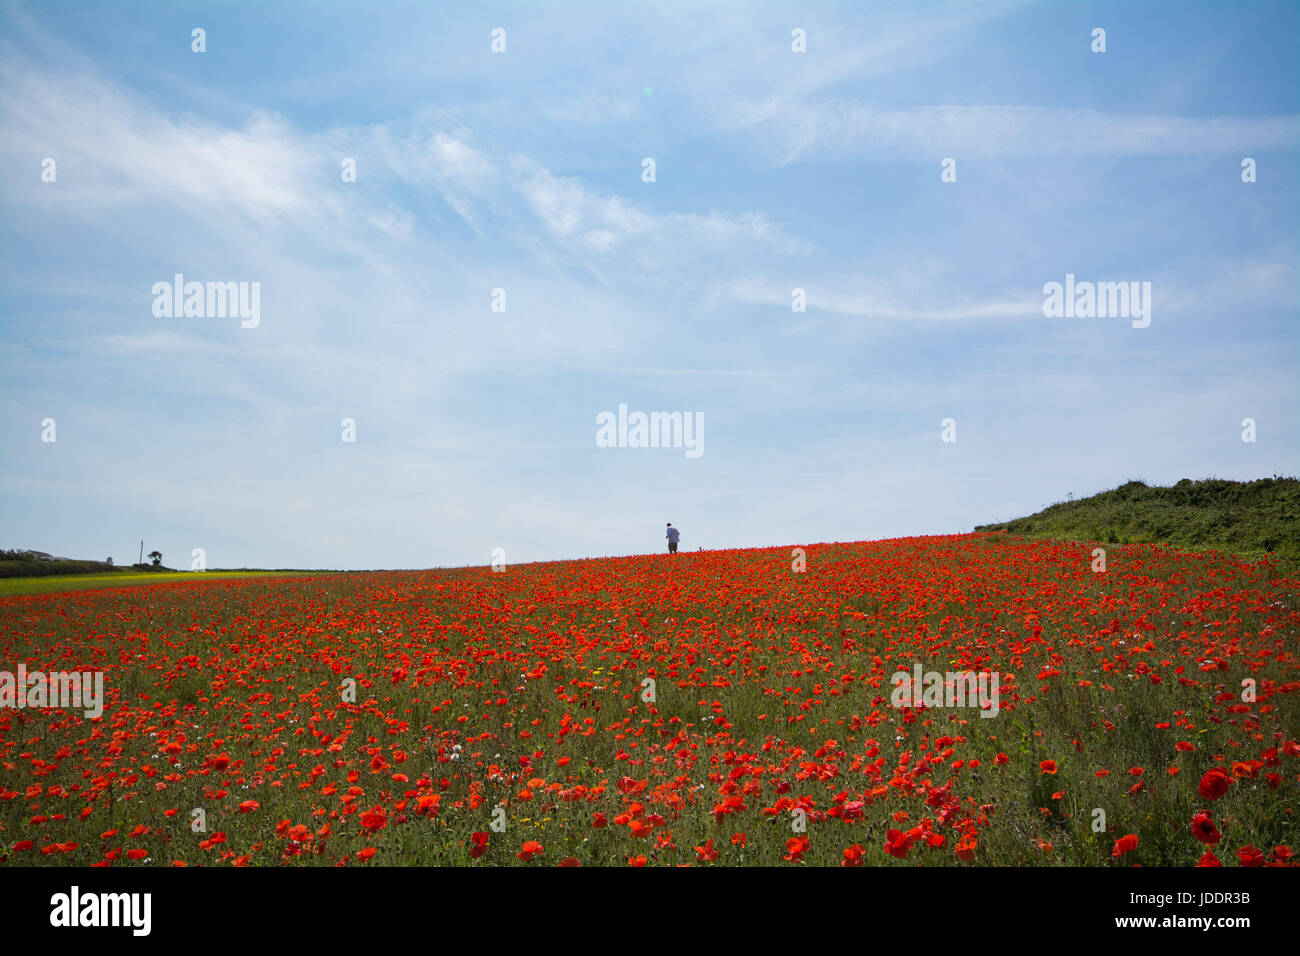 Crantock, Cornwall, UK. 20th June 2017. UK Weather. On the hottest day of the year so far, a field of poppies are in full bloom at Crantock, near Newquay. In the picture a photographer capturing the moment. Credit: cwallpix/Alamy Live News Stock Photo